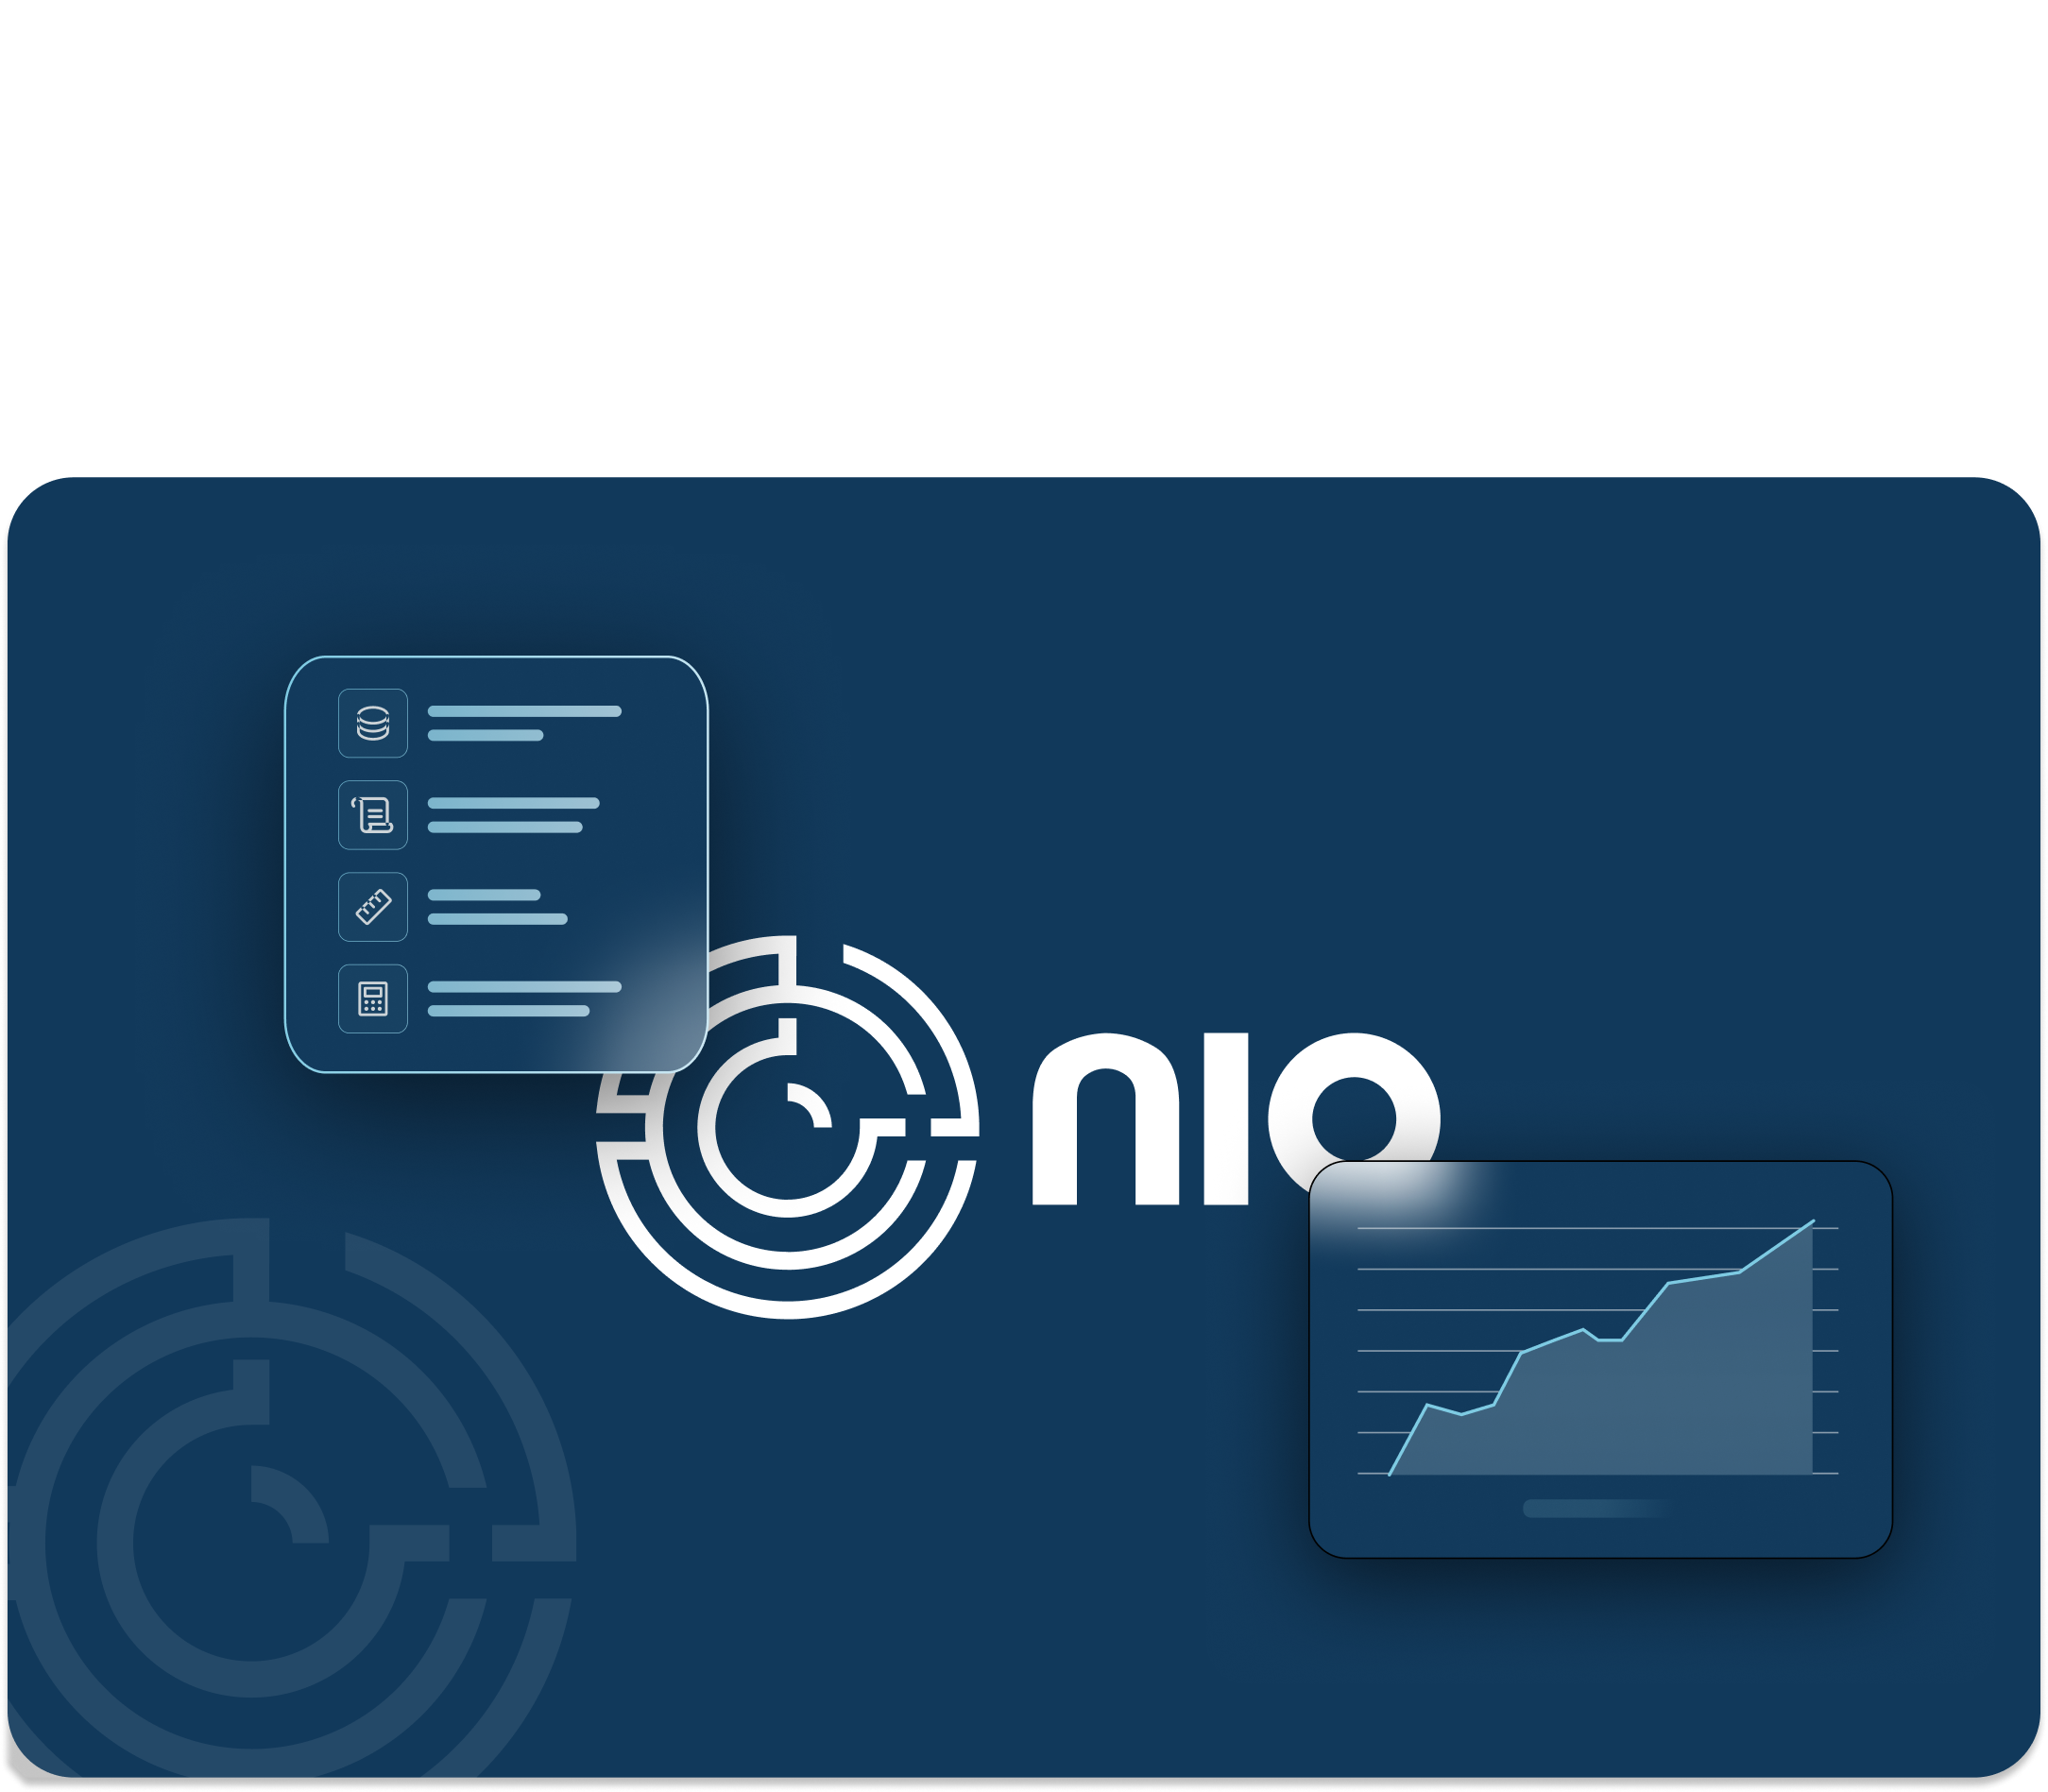 An abstract design showing the nIQ logo and some graphs hover over a dark navy background. 